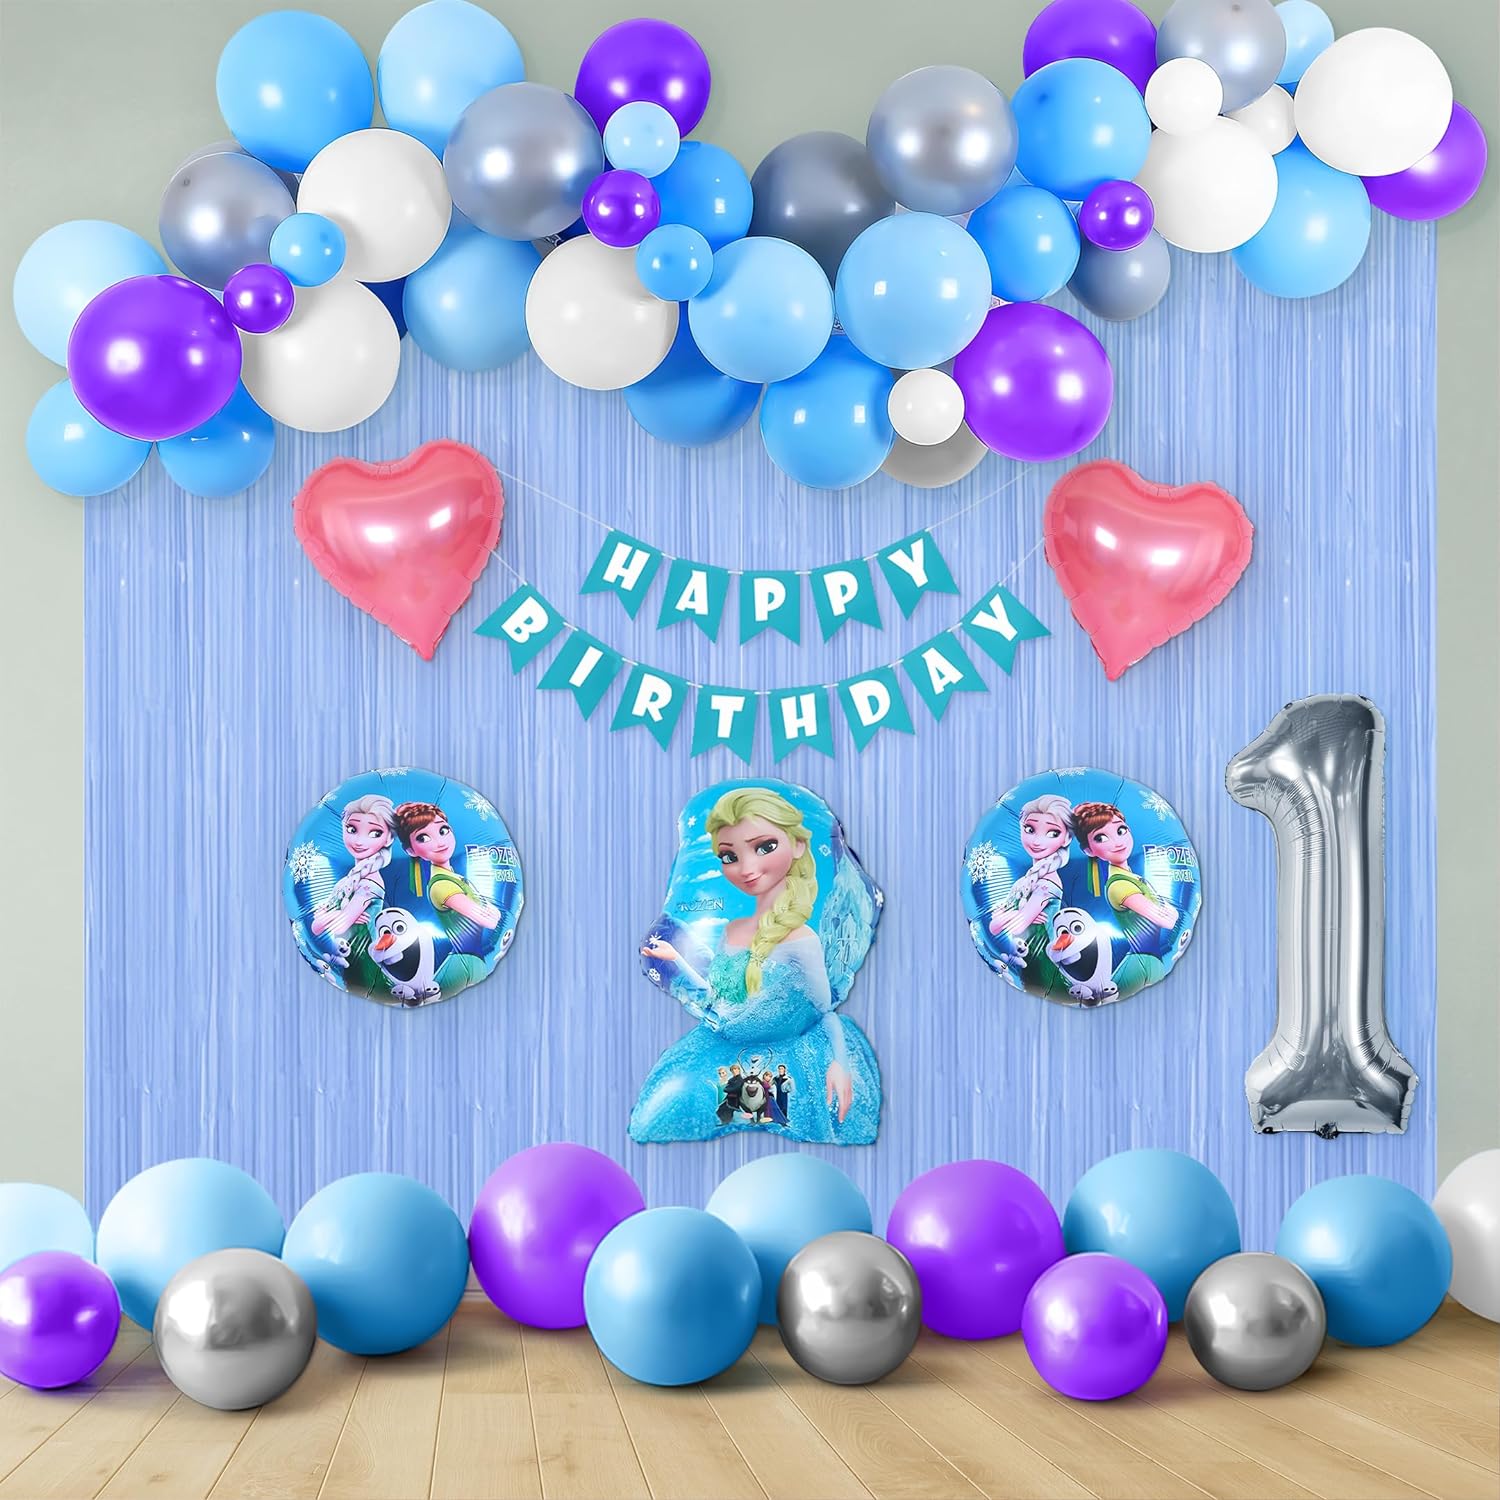 Frozen-Inspired Decor for a 1st Birthday